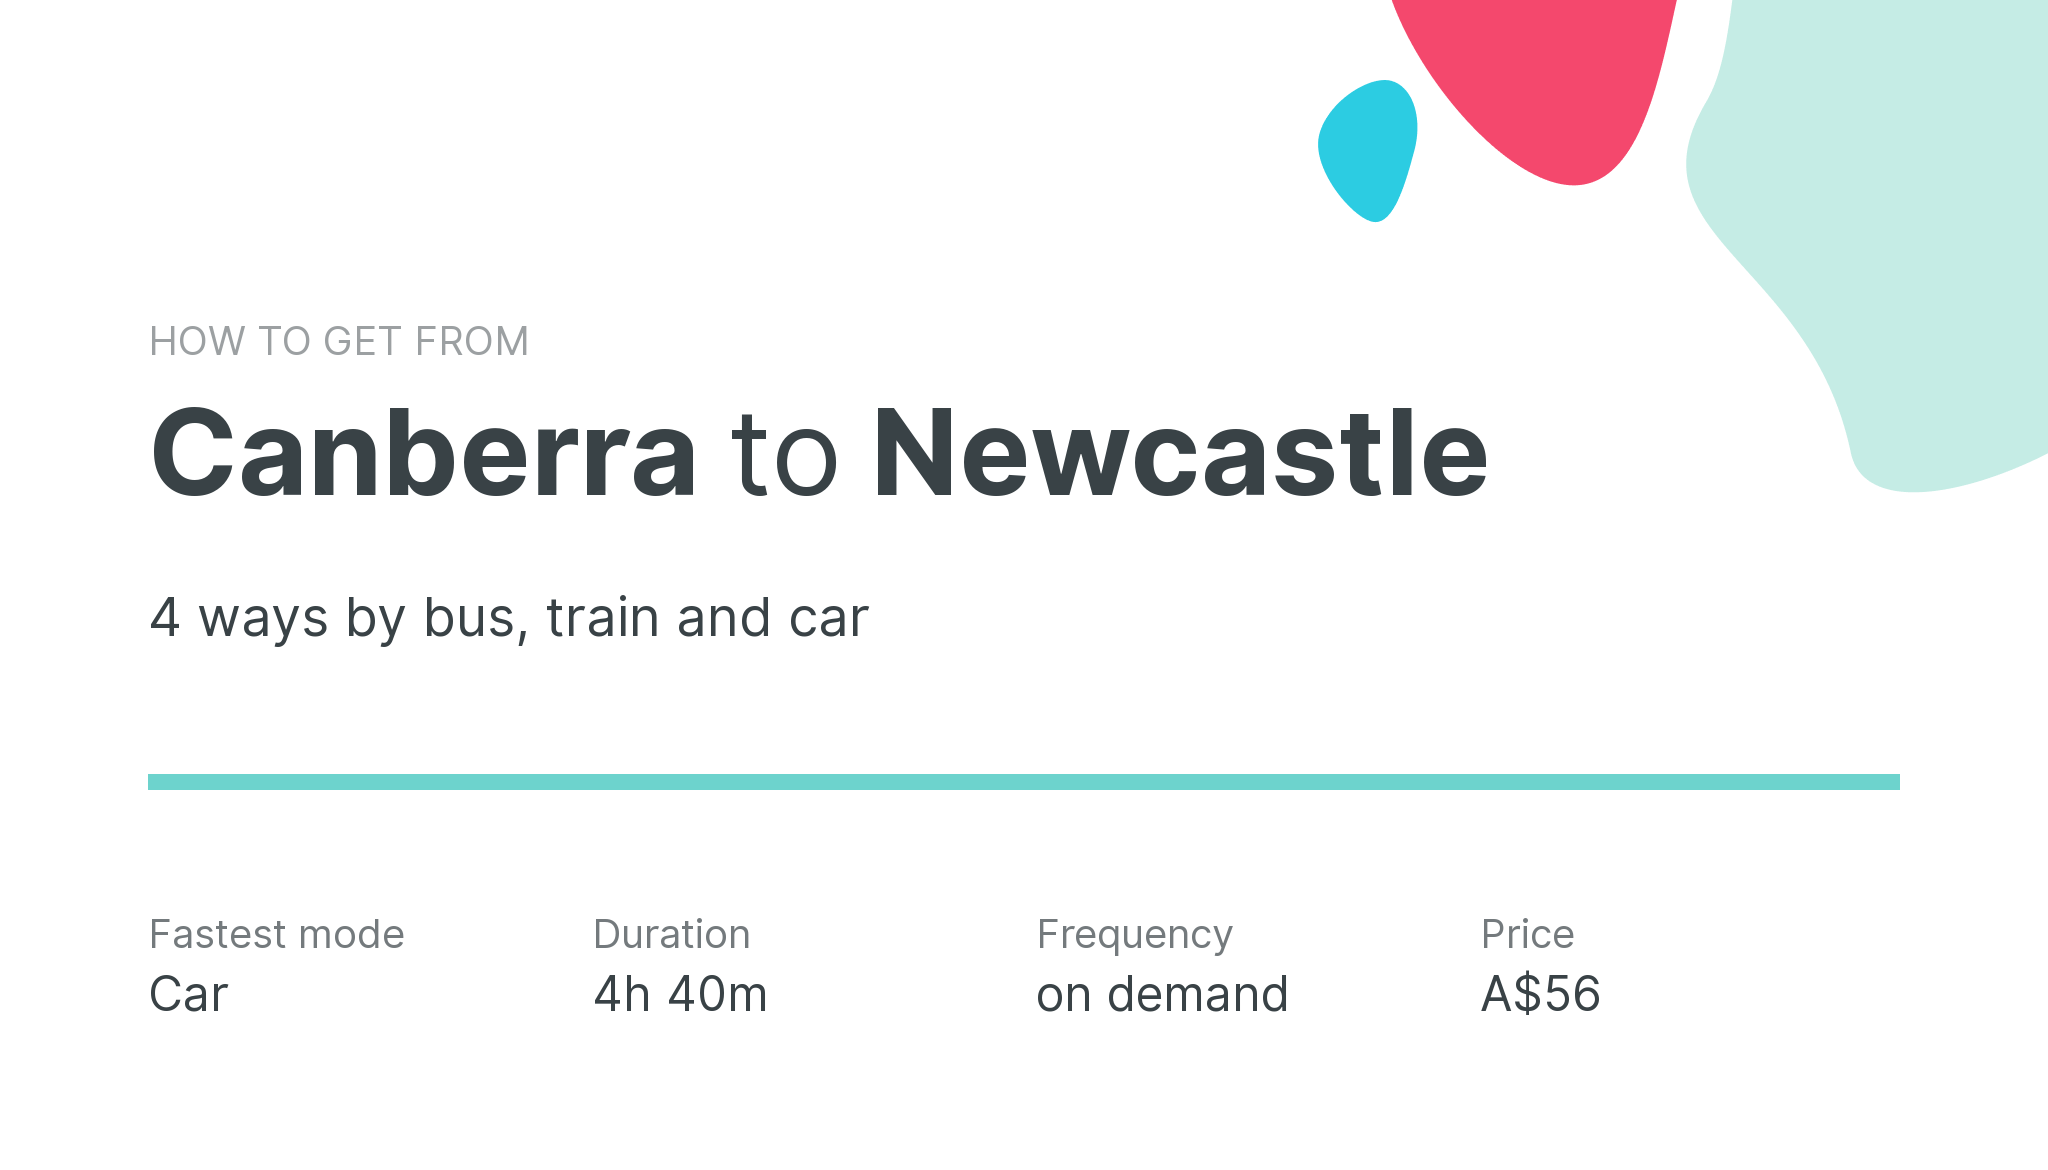 How do I get from Canberra to Newcastle